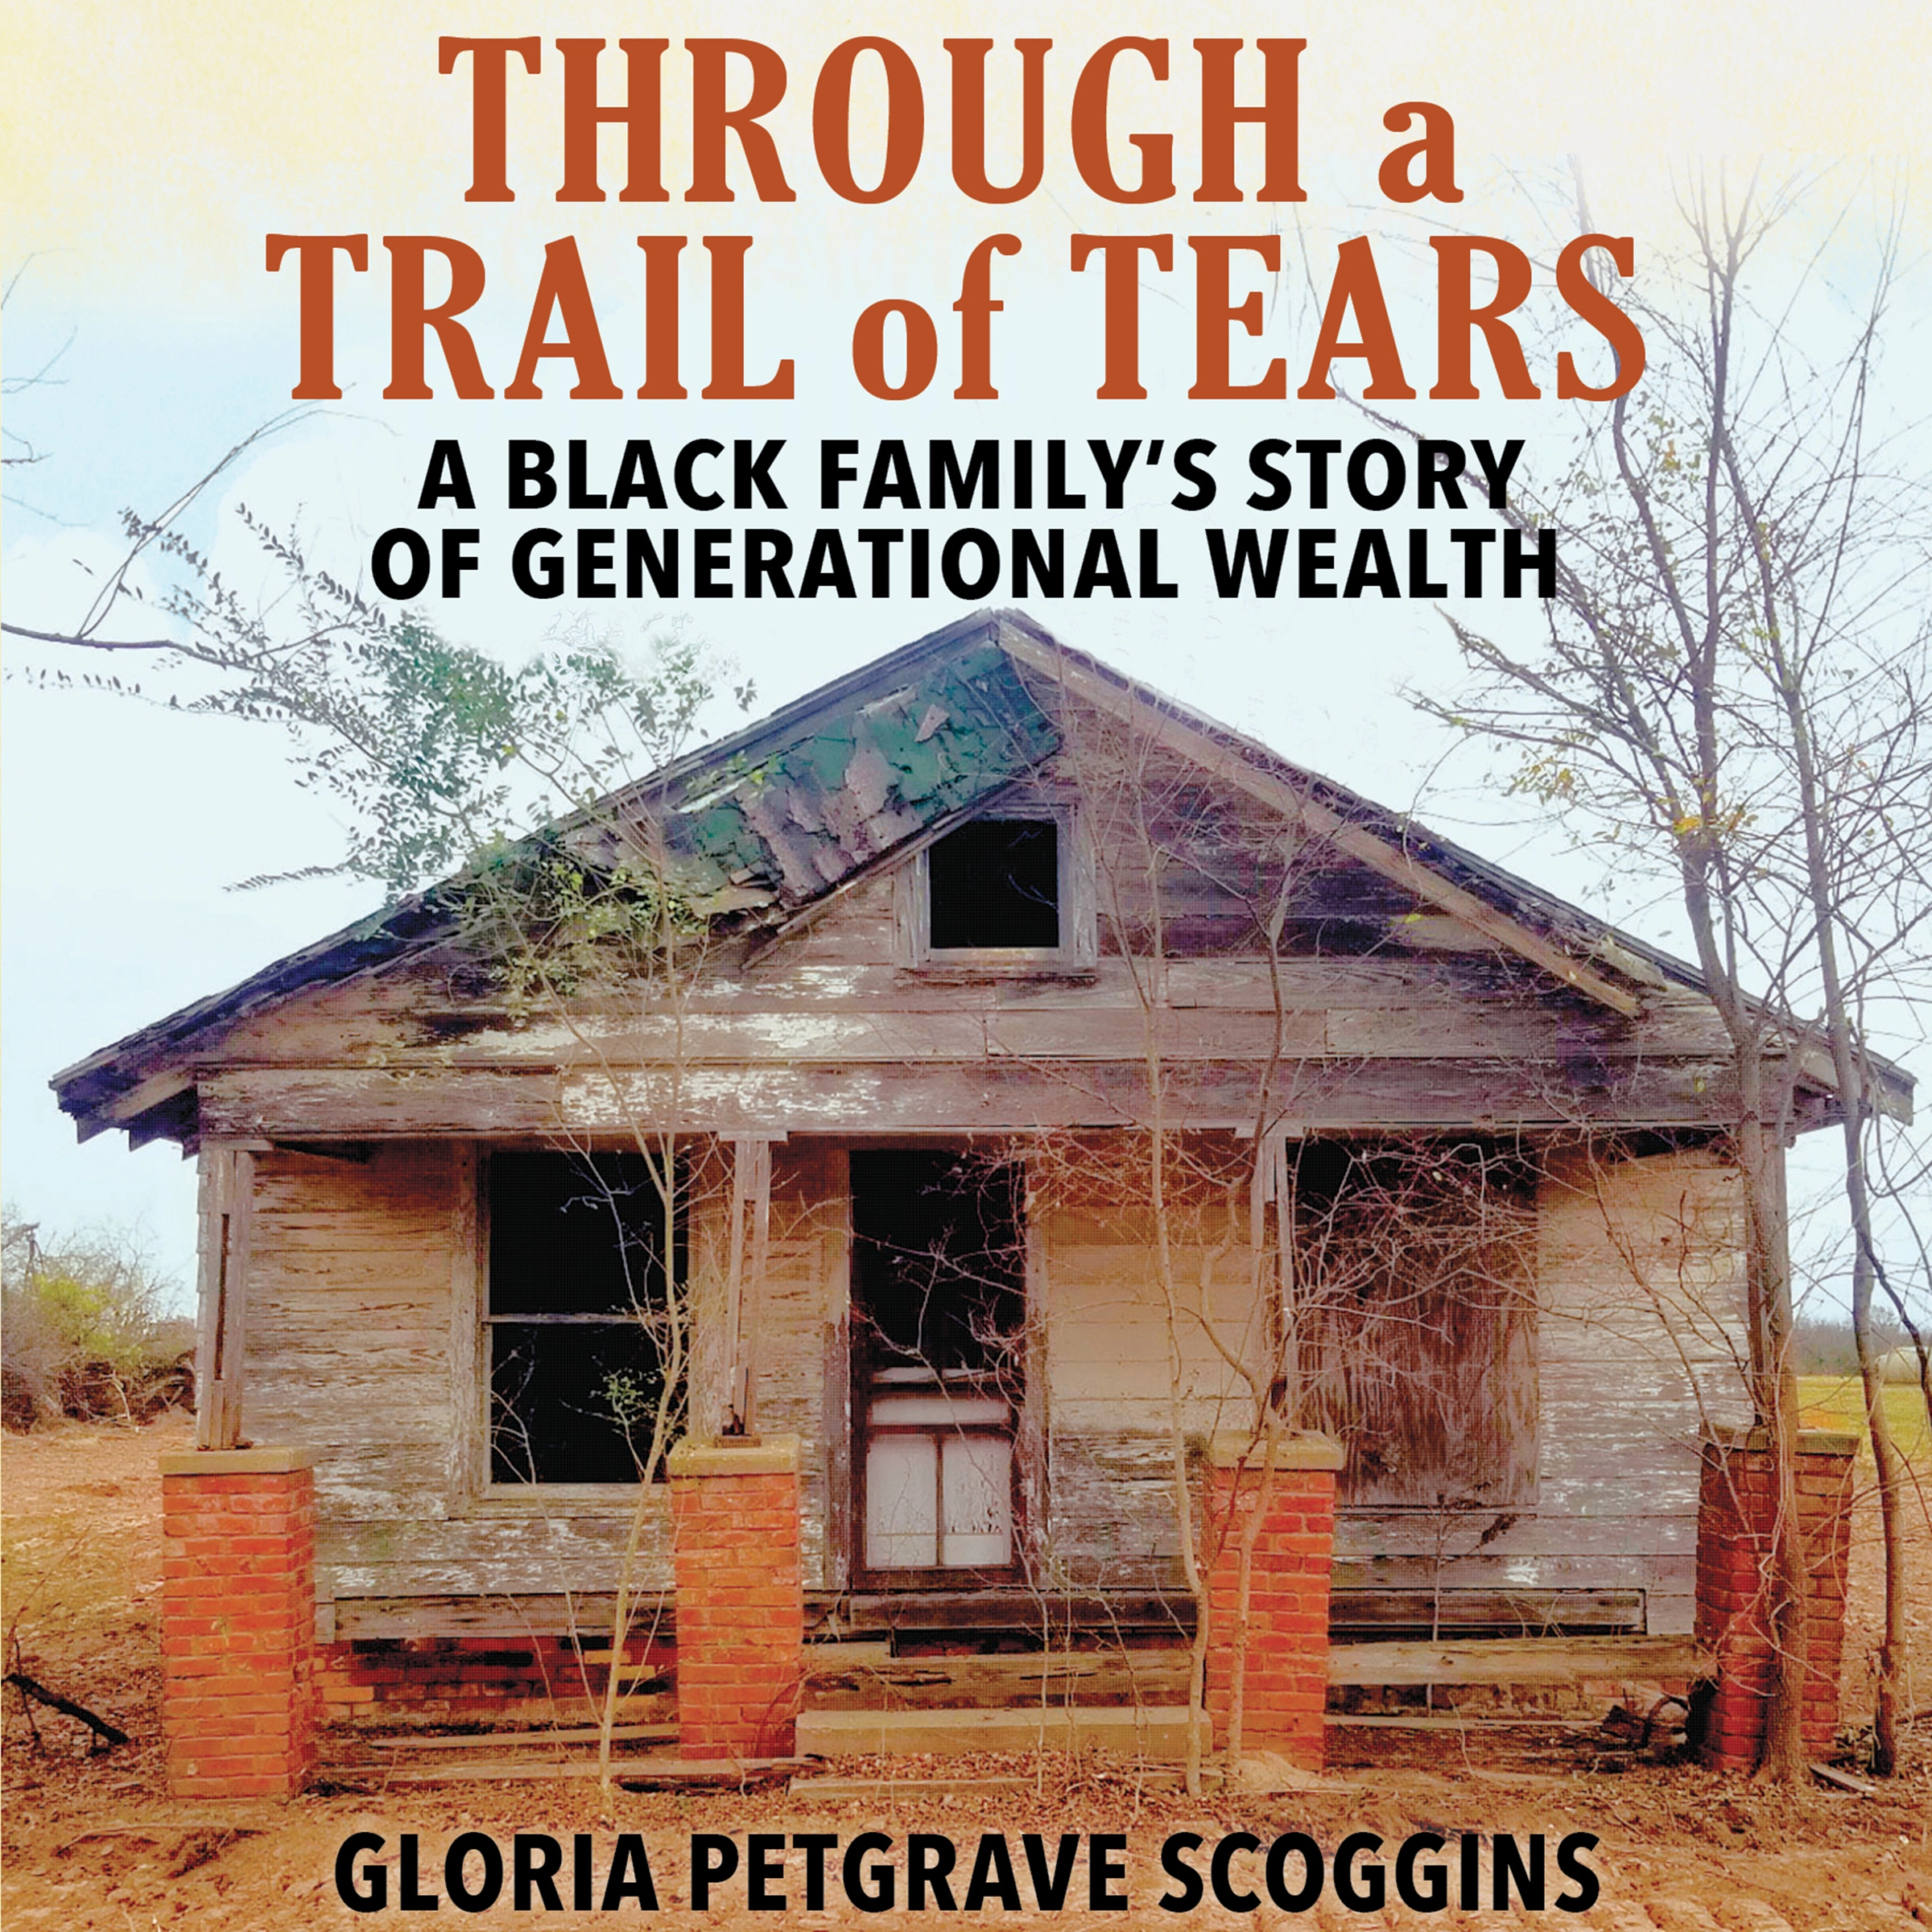 Through a Trail of Tears by Gloria Petgrave Scoggins Audiobook